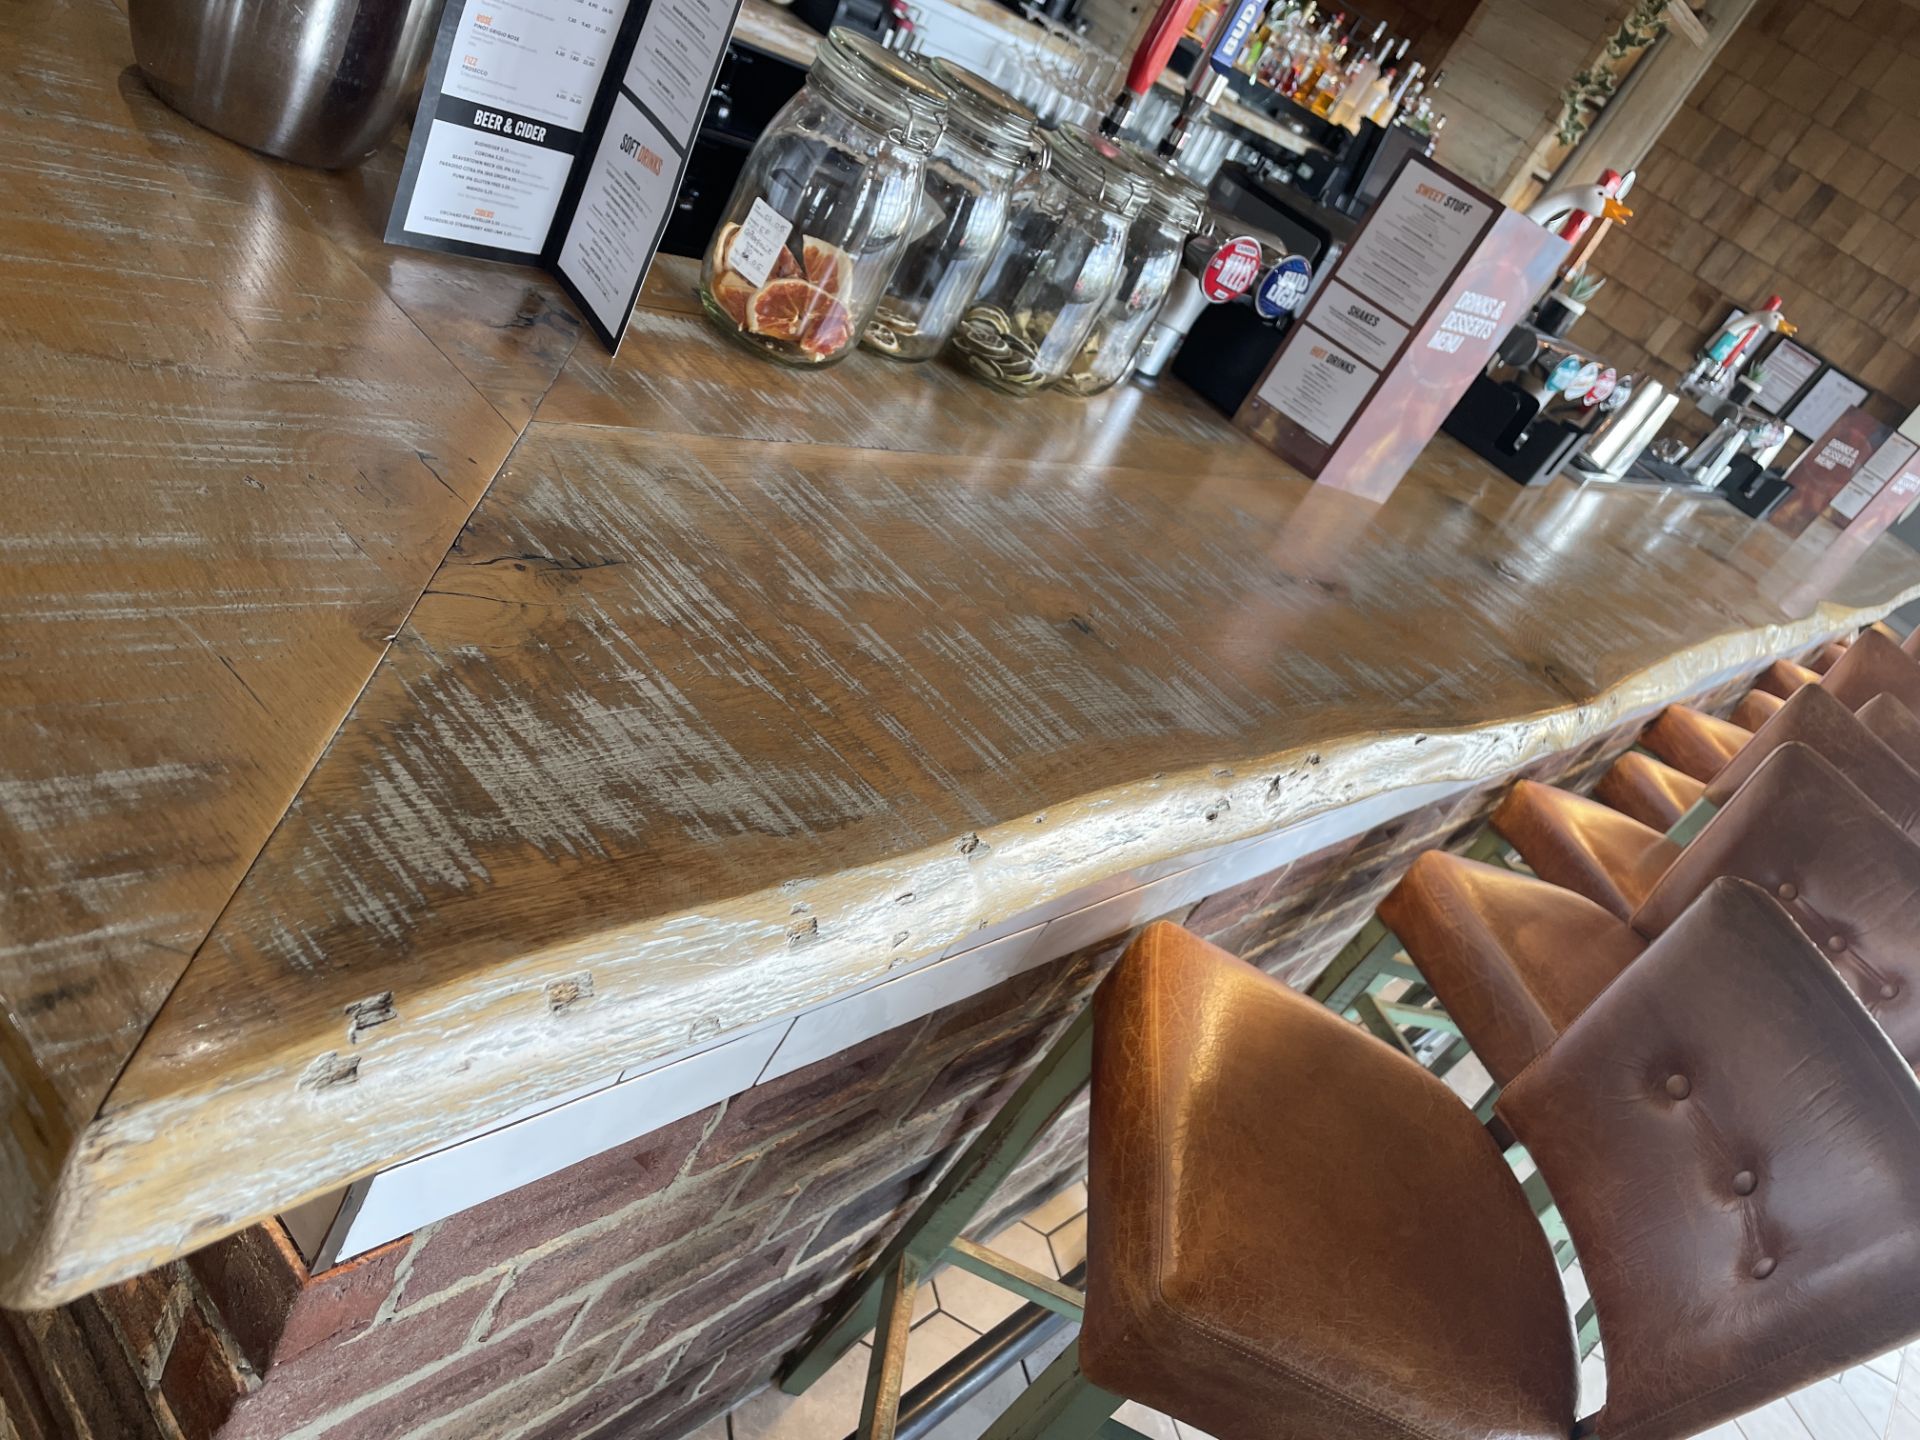 1 x Rustic Knotty Oak L Shaped Bar Top With an Earthy Finish and Live Edge - Approx 22ft in Legth! - Image 7 of 16